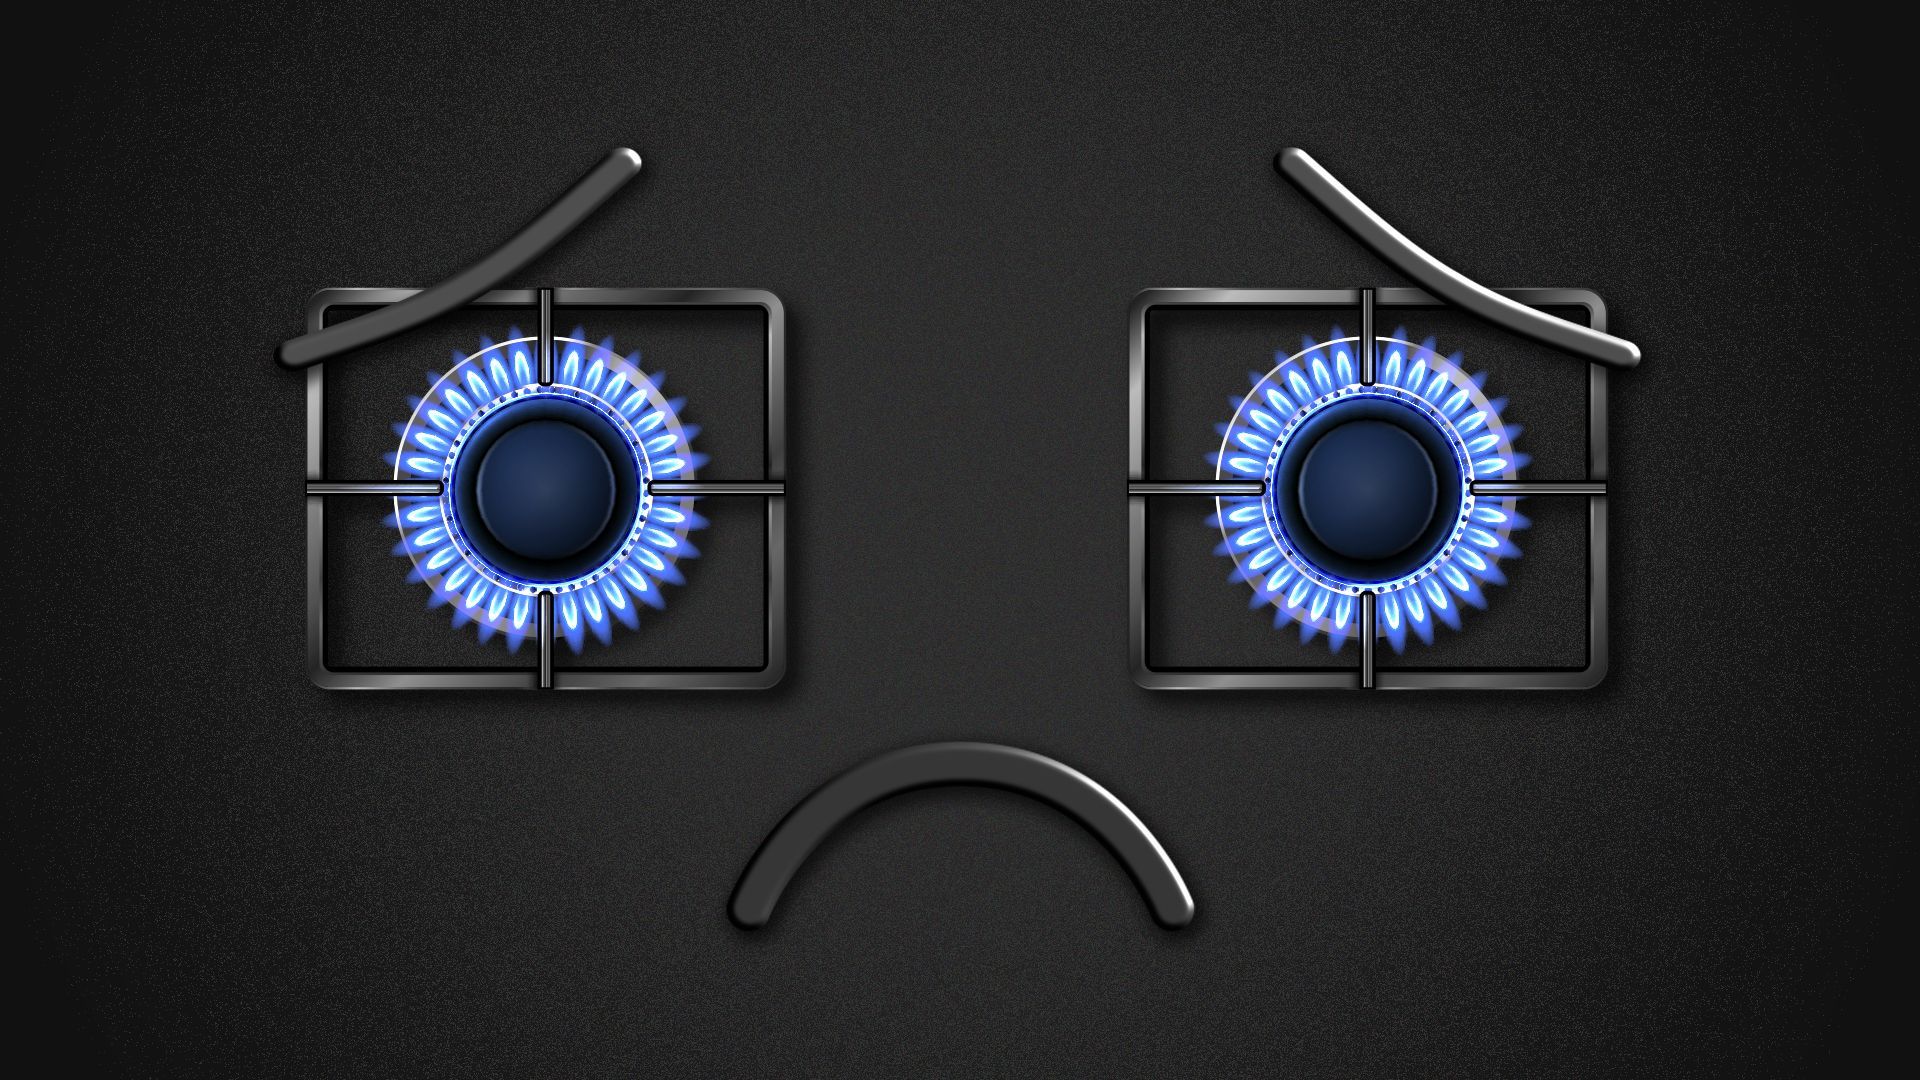 Illustration of a sad face with gas stove burners as the eyes.